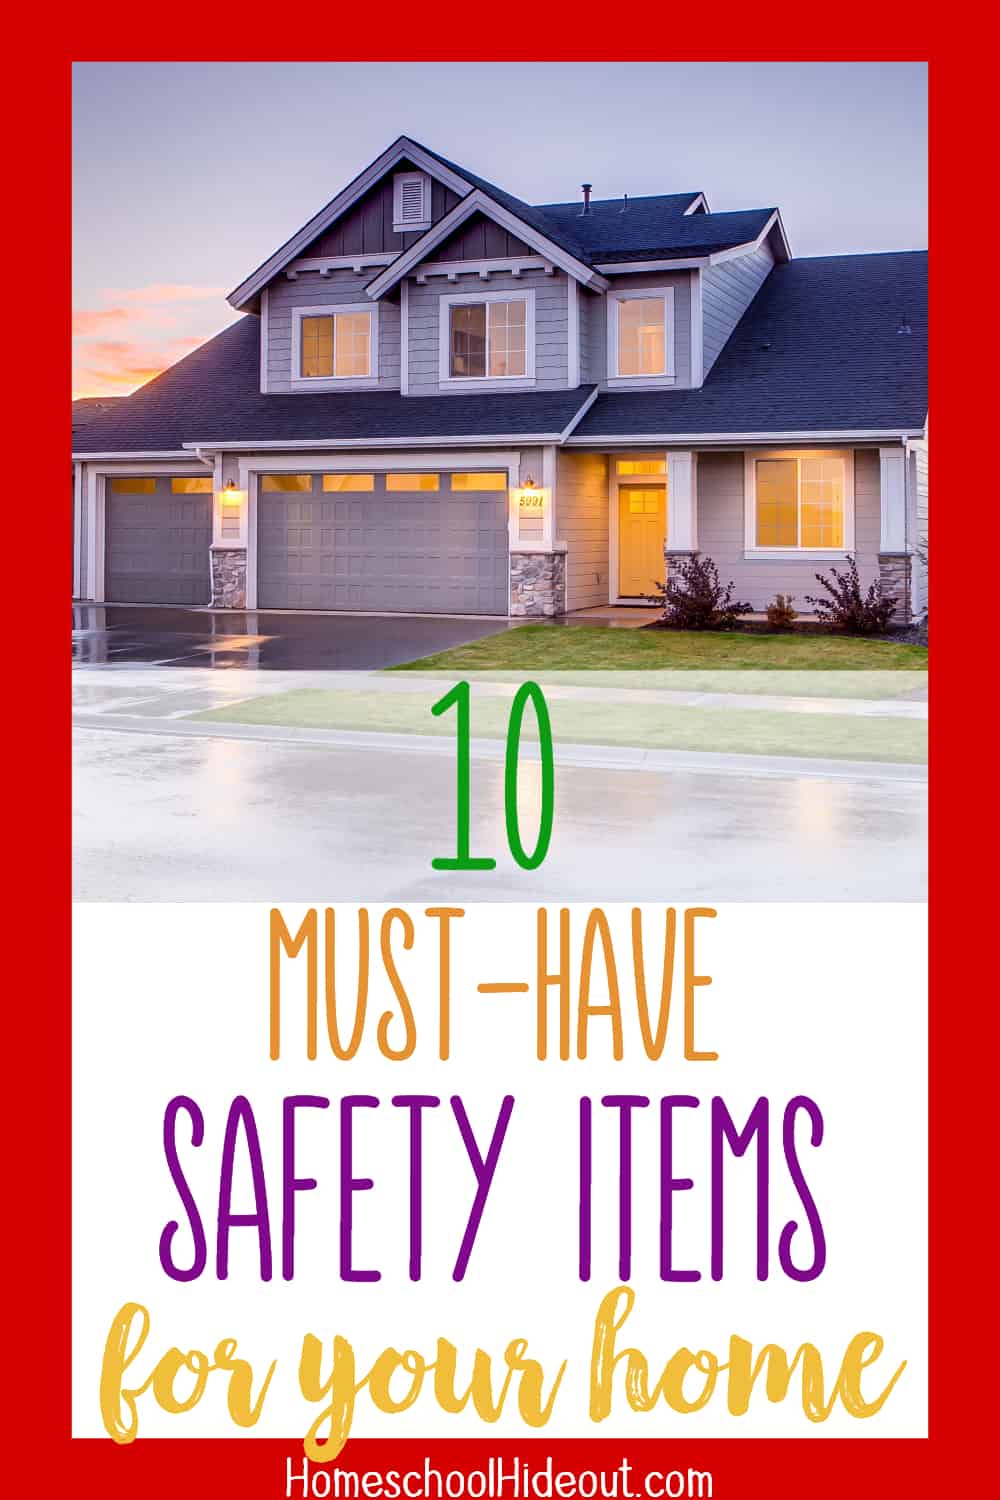 I never even thought about most of these safety items every home needs! It's so important, especially #6!